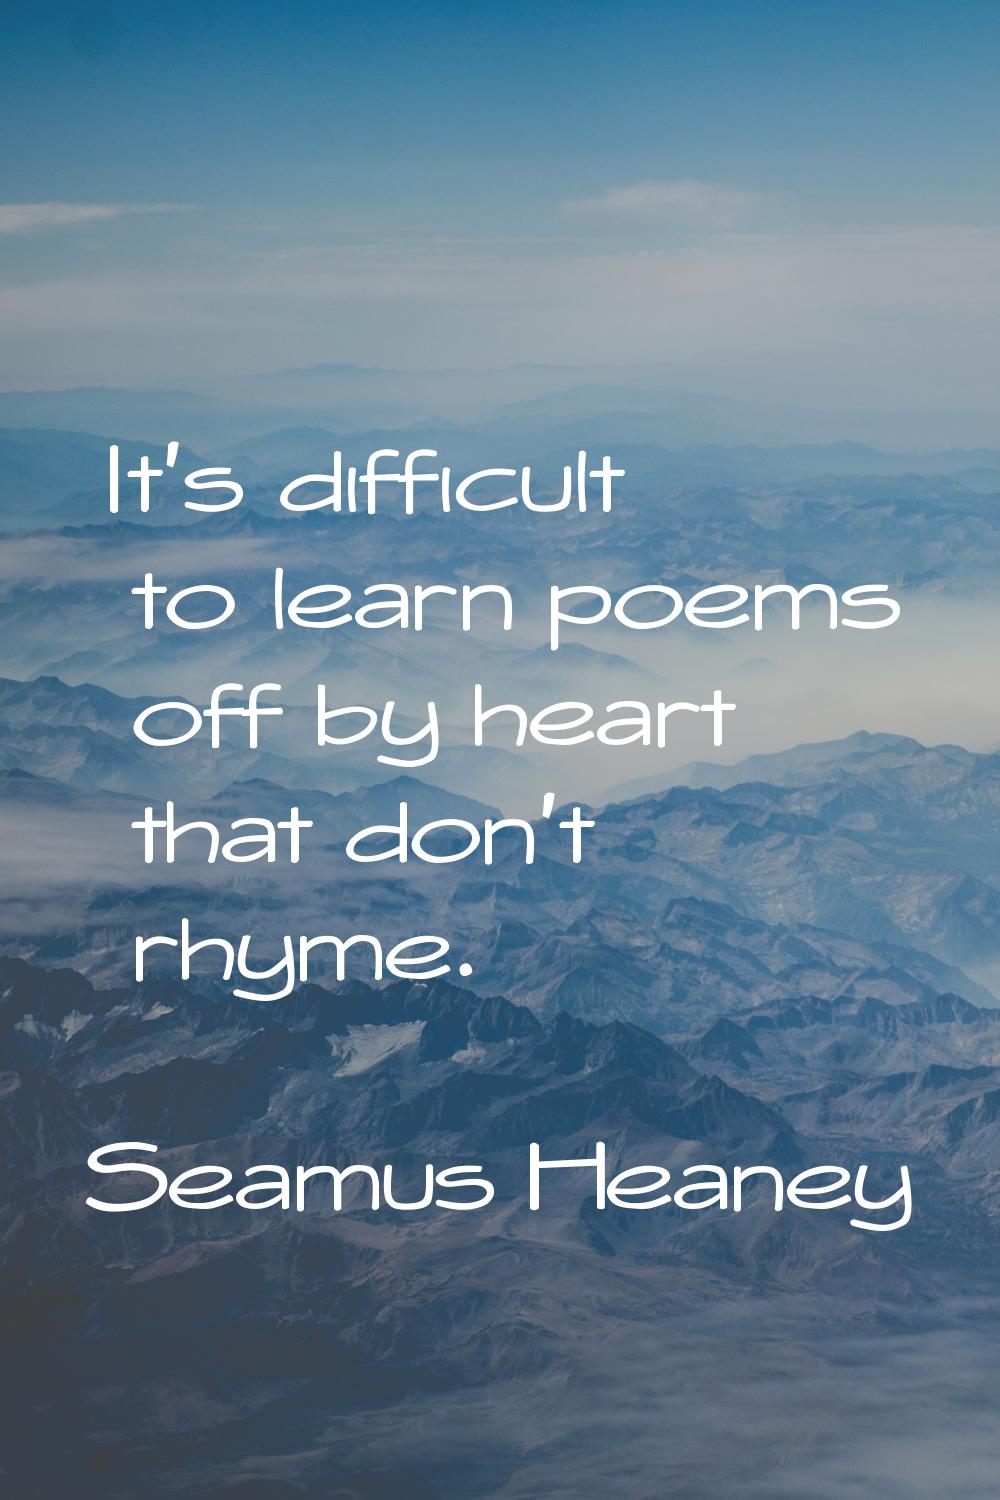 It's difficult to learn poems off by heart that don't rhyme.